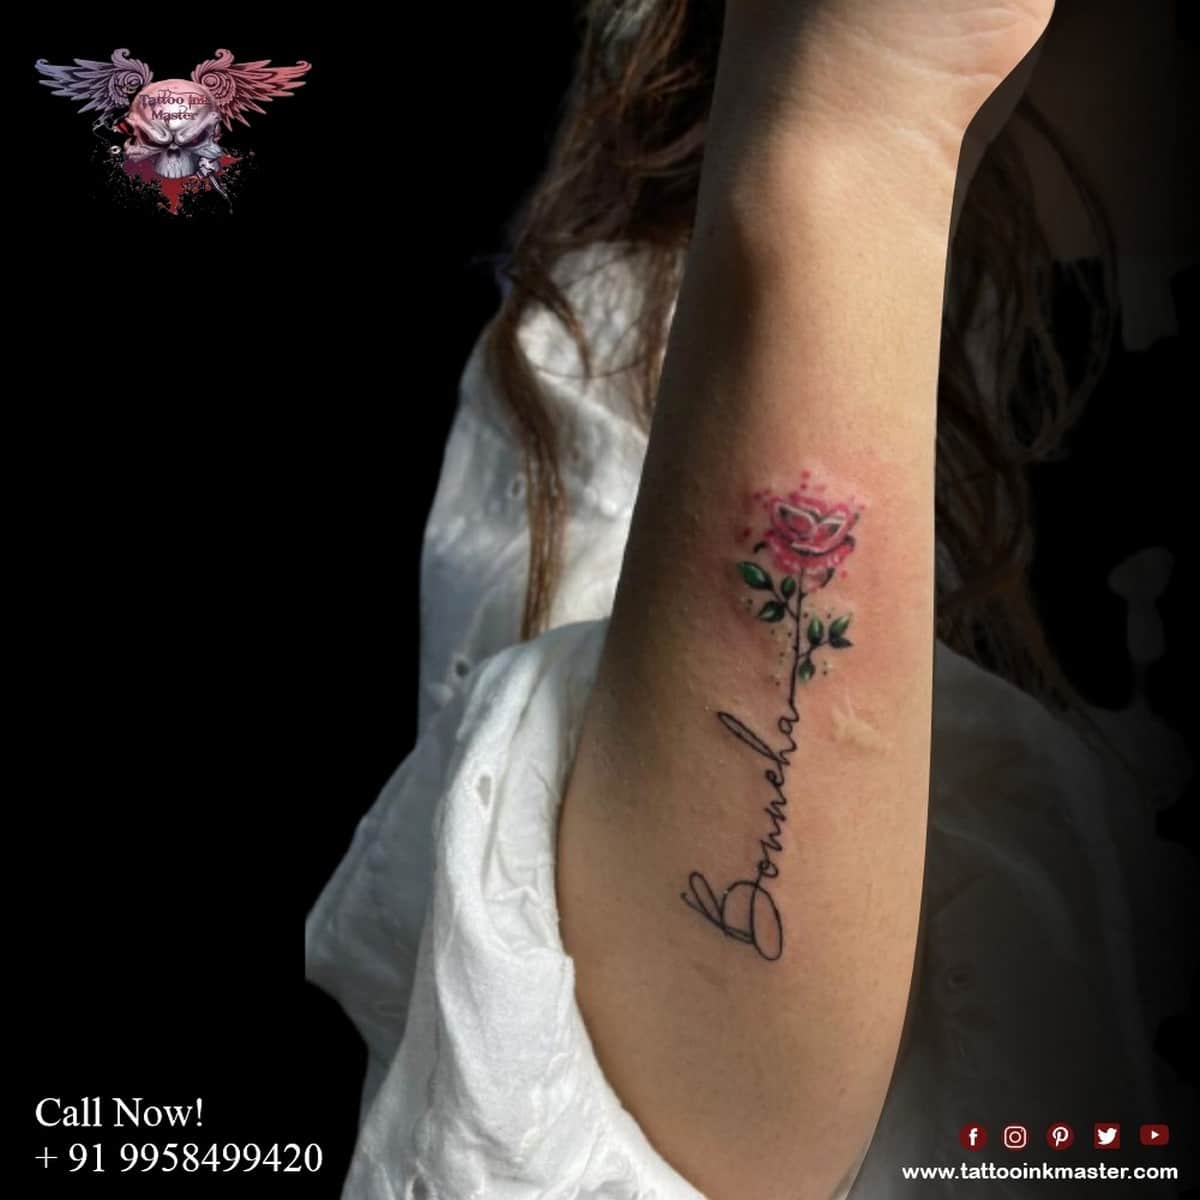 Rose Tattoo with Name on Hand | Tattoo Ink Master